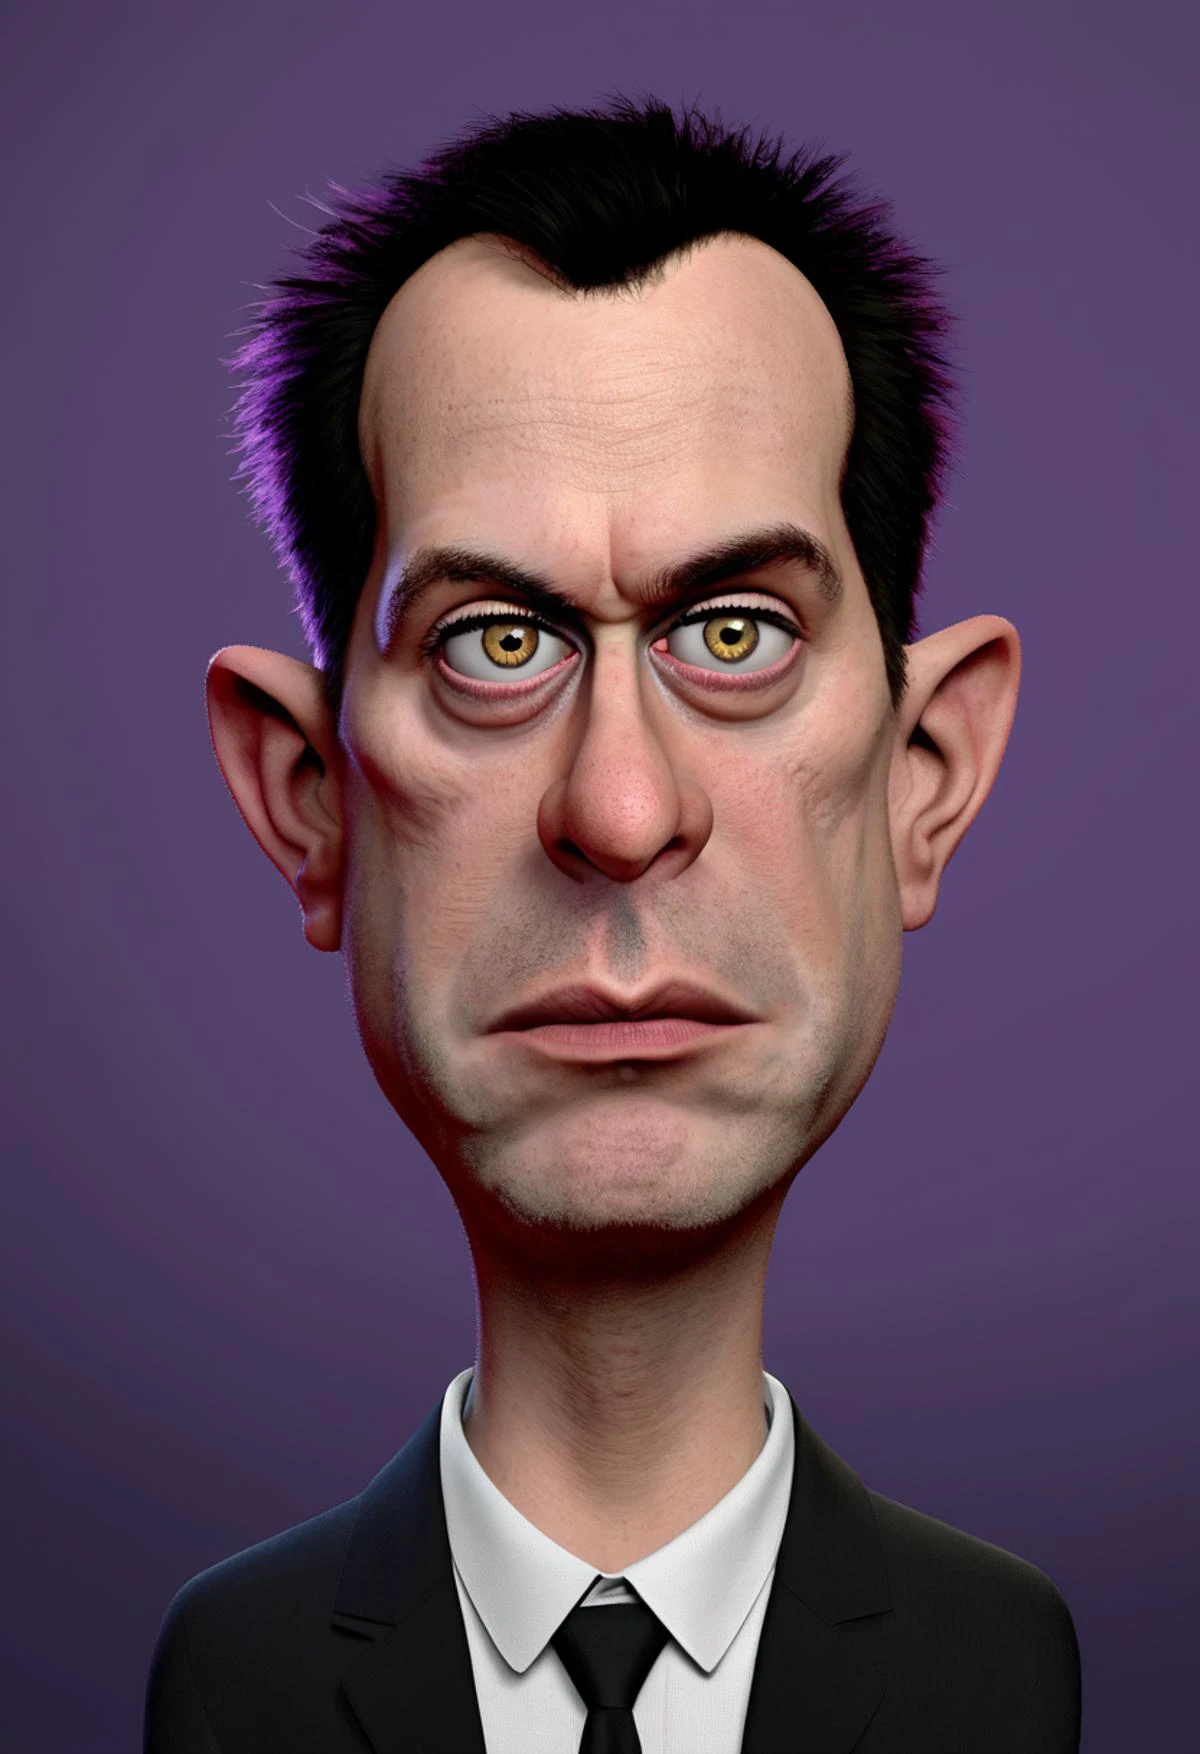 Caricature of a man with exaggerated features, 3D digital art, tags: man with large eyes, prominent ears, dark hair, surprised expression, wearing black suit, white shirt, dark background, purple hue, detailed texture, high resolution, close-up, stylized realism, digital illustration, hyperbolic proportions, intense gaze, stylized portrait, character design, sharp shadows.